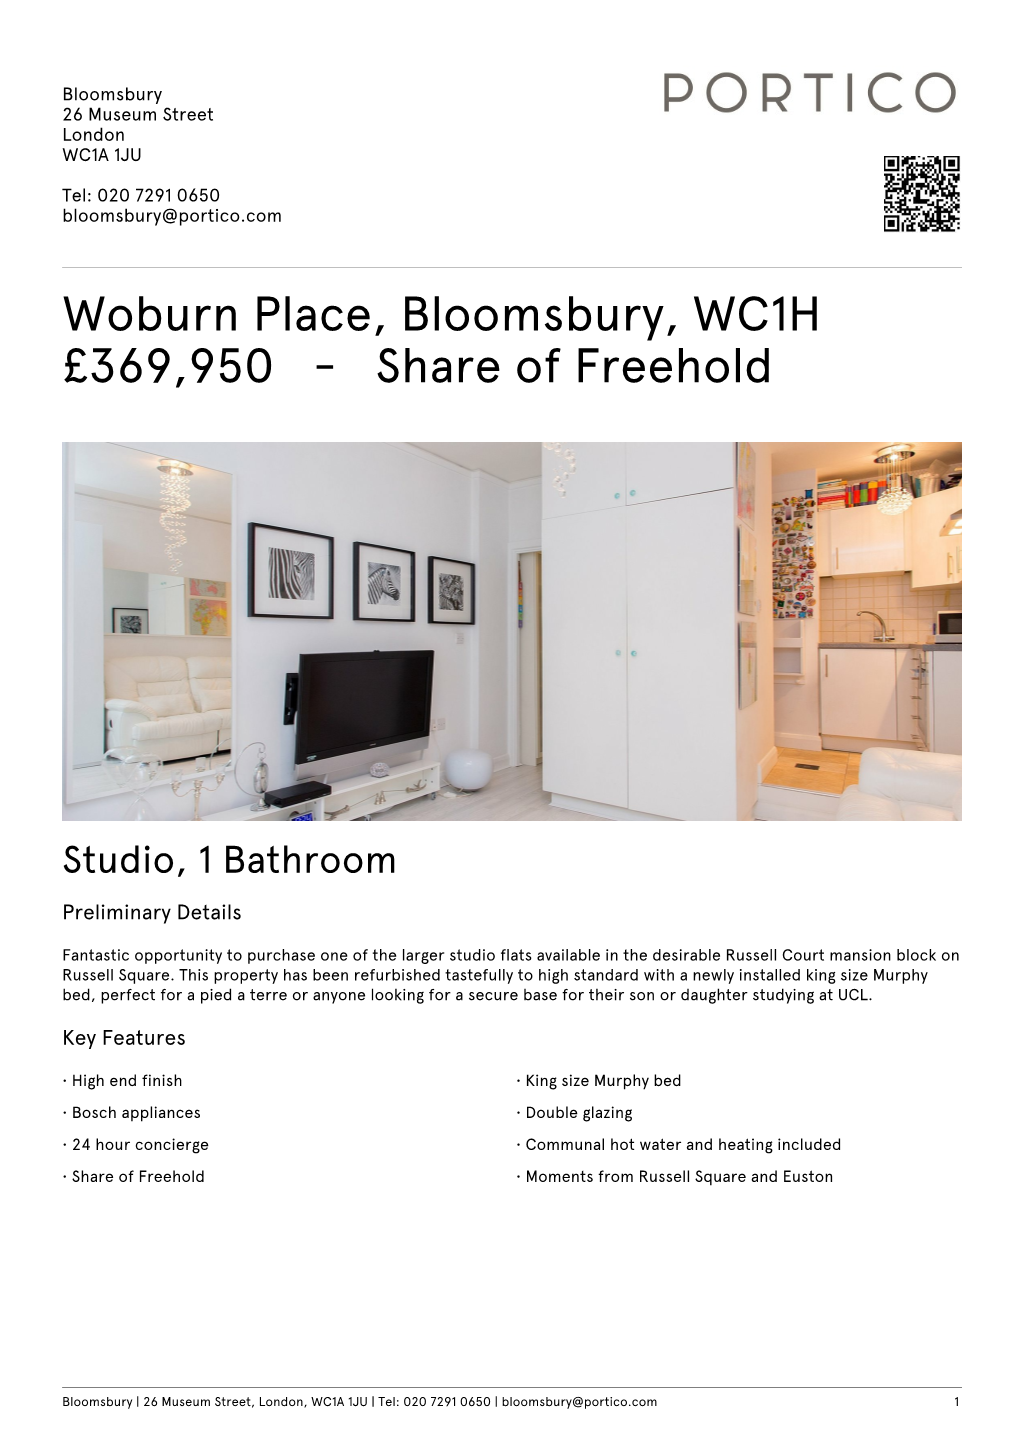 Woburn Place, Bloomsbury, WC1H £369950